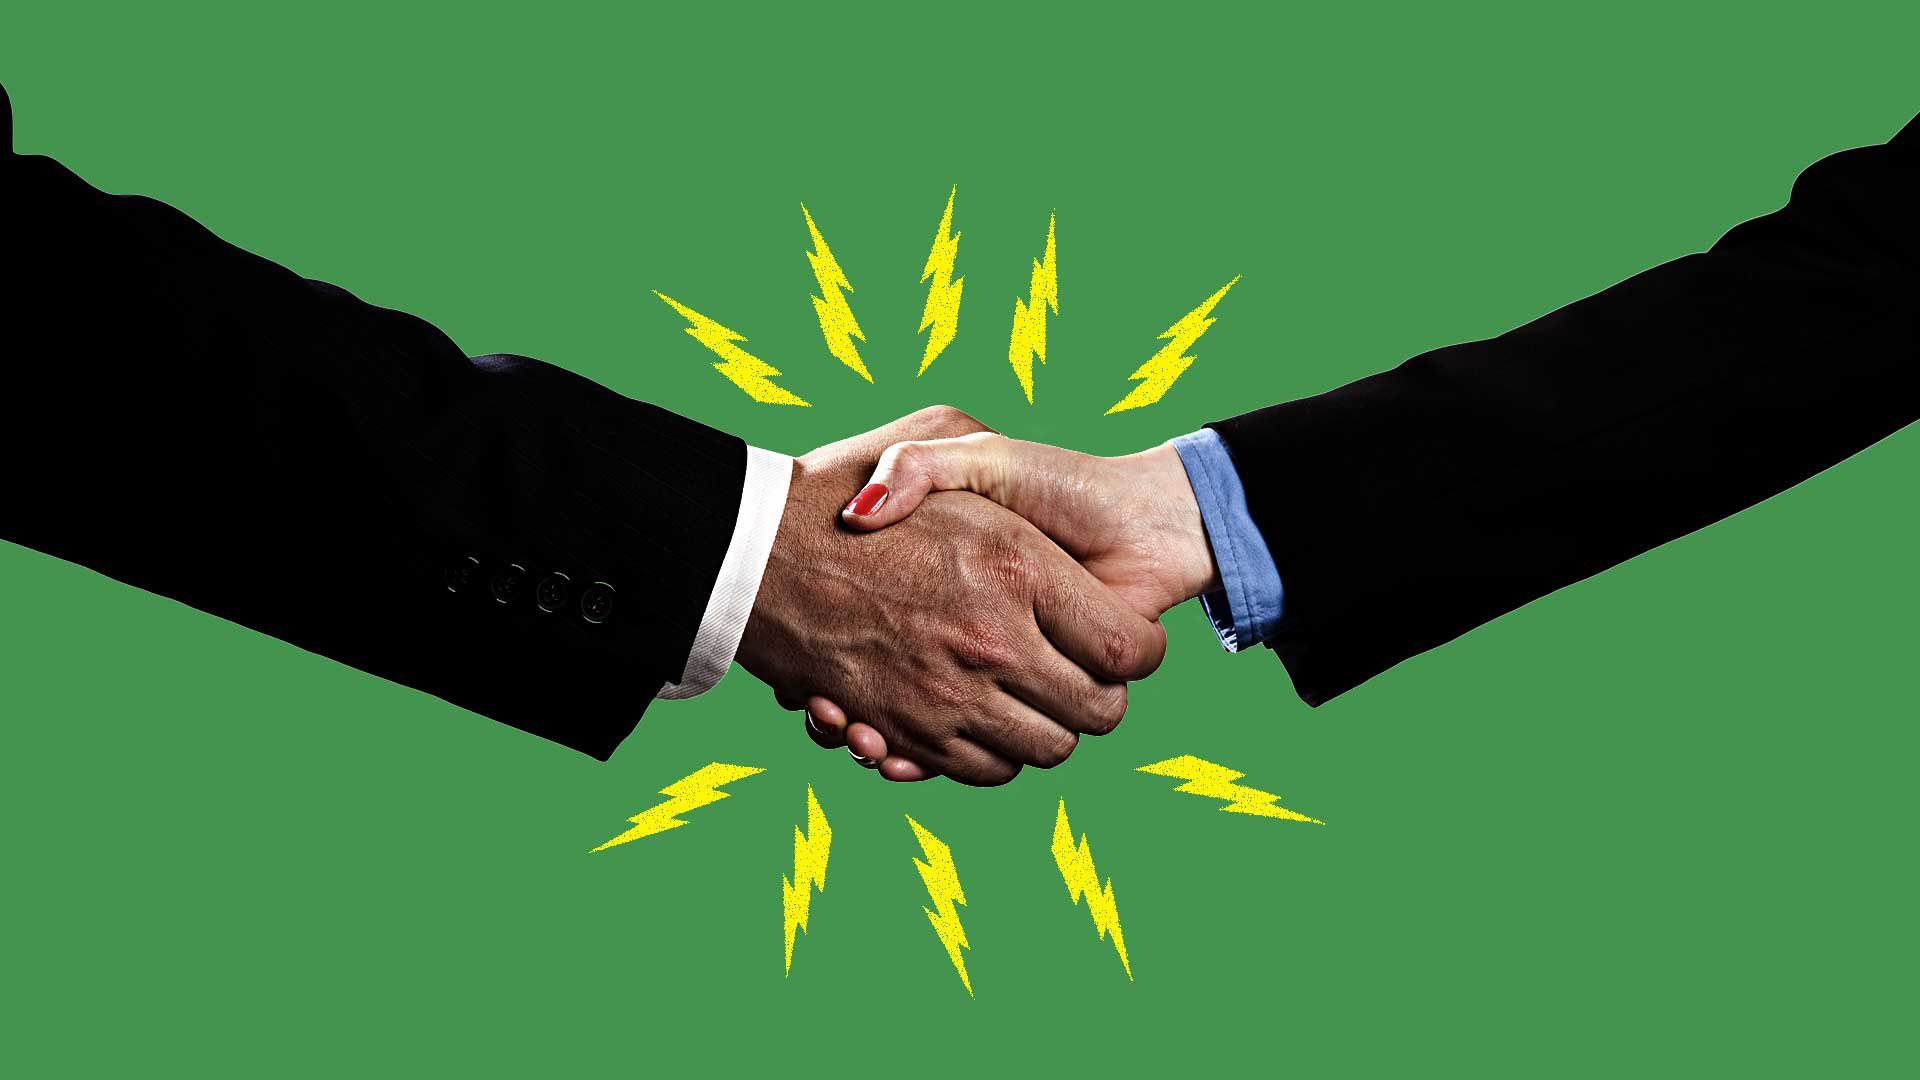 In this illustration, a man and a woman shake hands while wearing business suits, and lighting rods burst from their handshake.